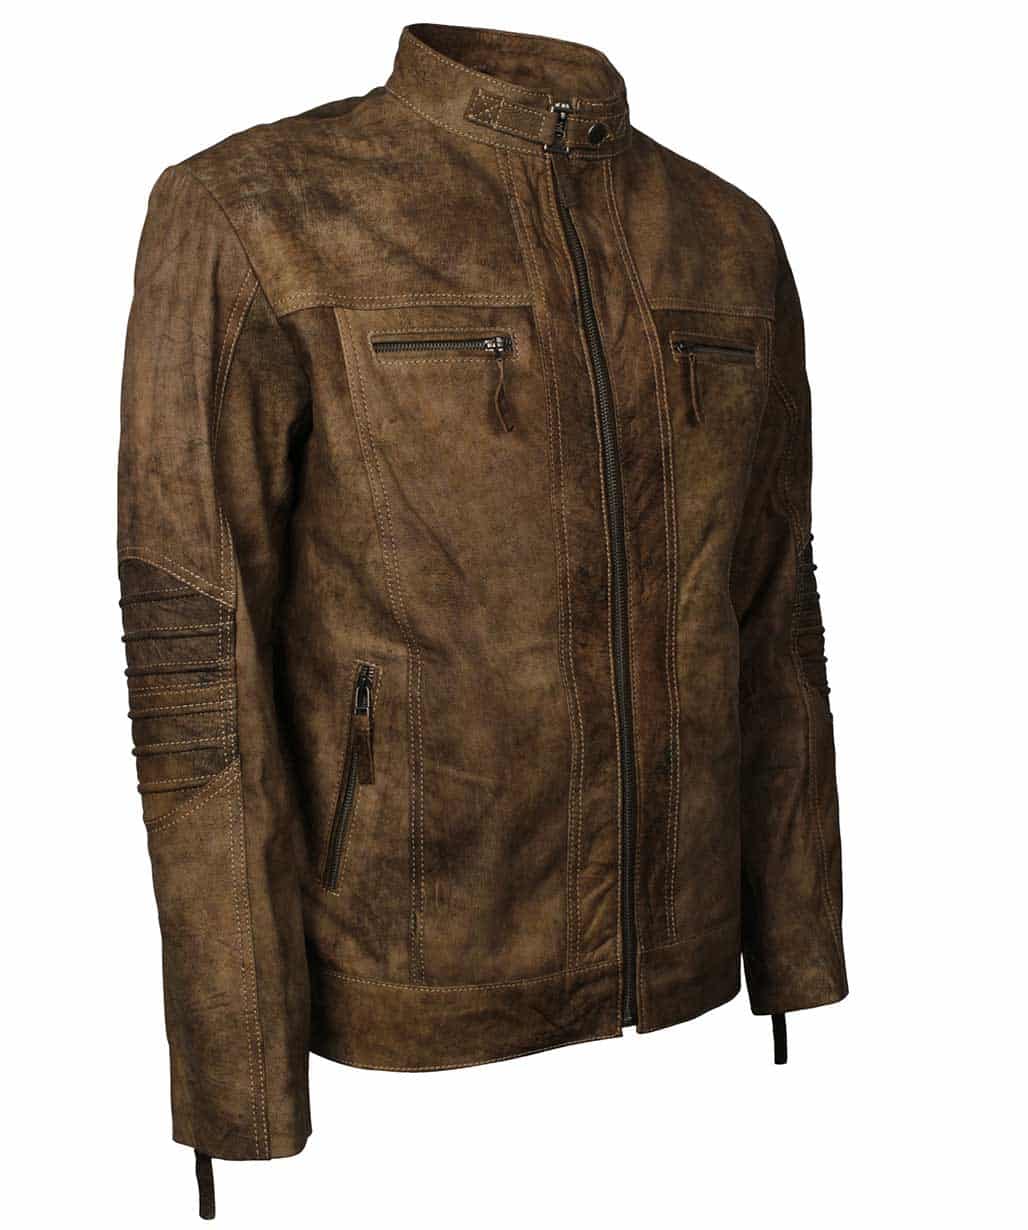 tryphone-brown-distressed-leather-jacket-UK-USA